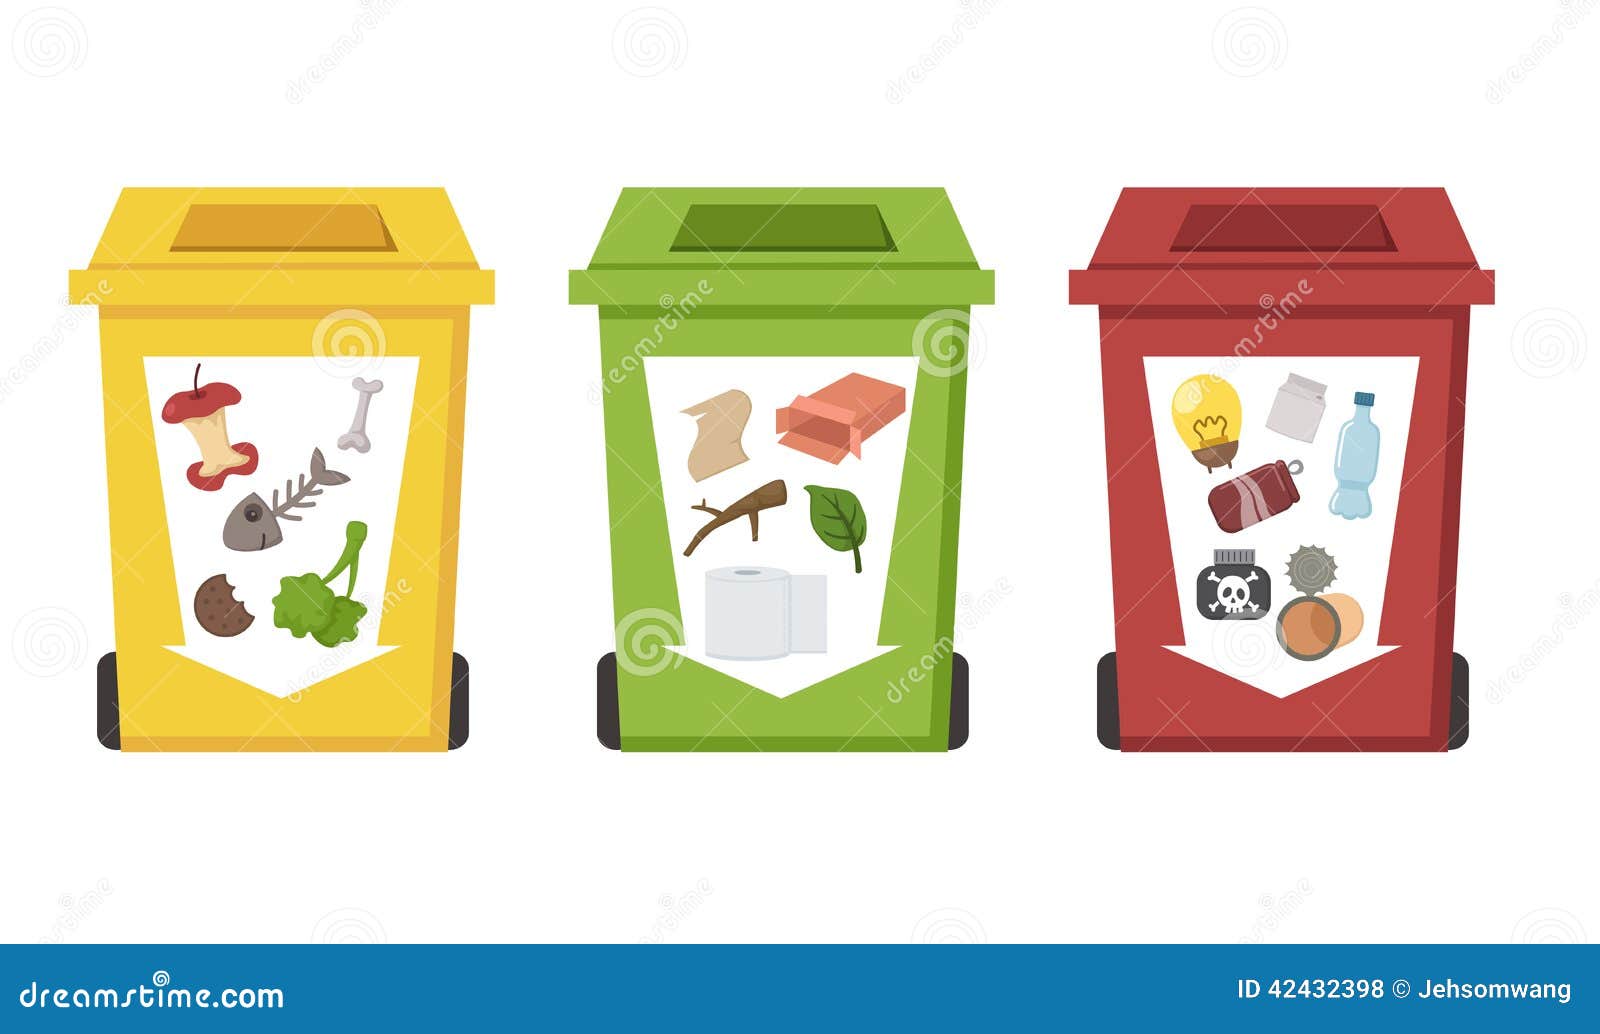 https://thumbs.dreamstime.com/z/different-color-recycle-bins-illustration-42432398.jpg